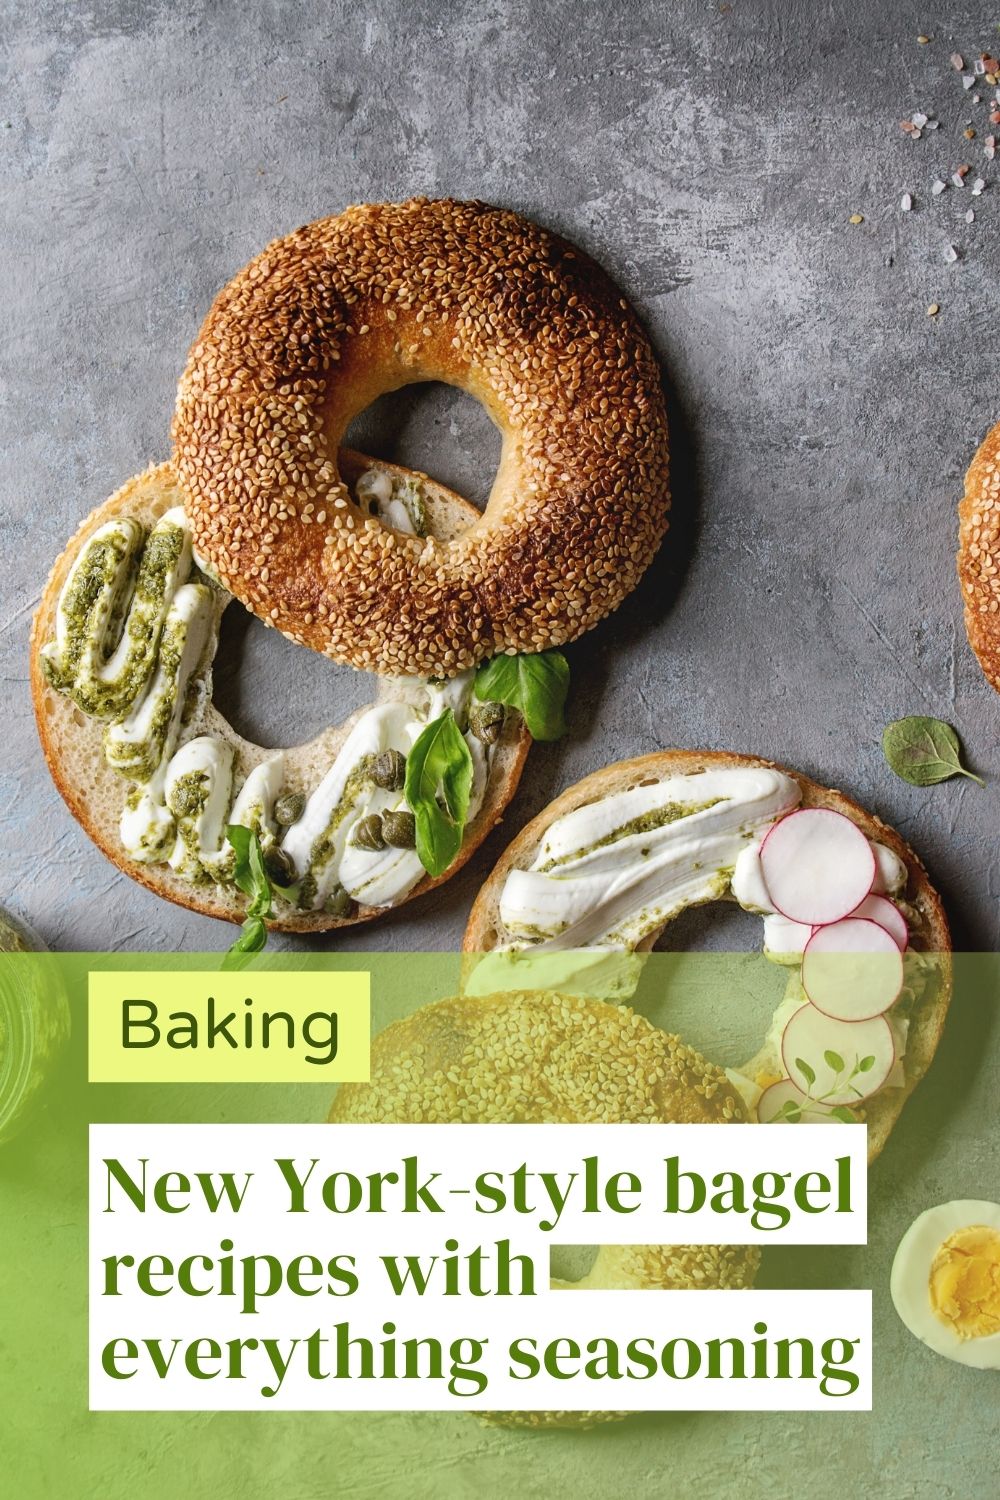 New York-style bagel recipes with everything seasoning